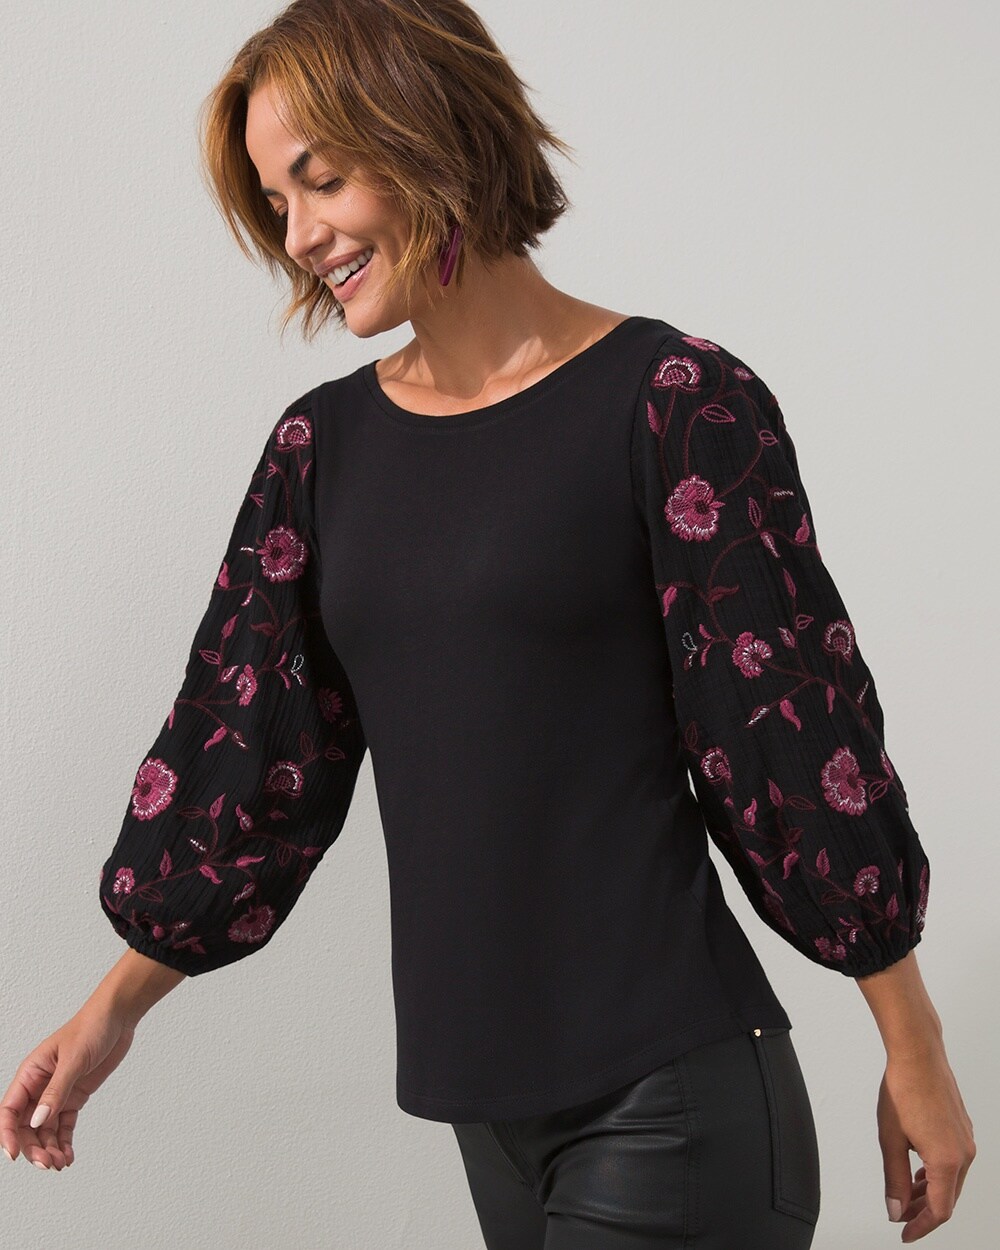 Embroidered Sleeve Knit Top video preview image, click to start video